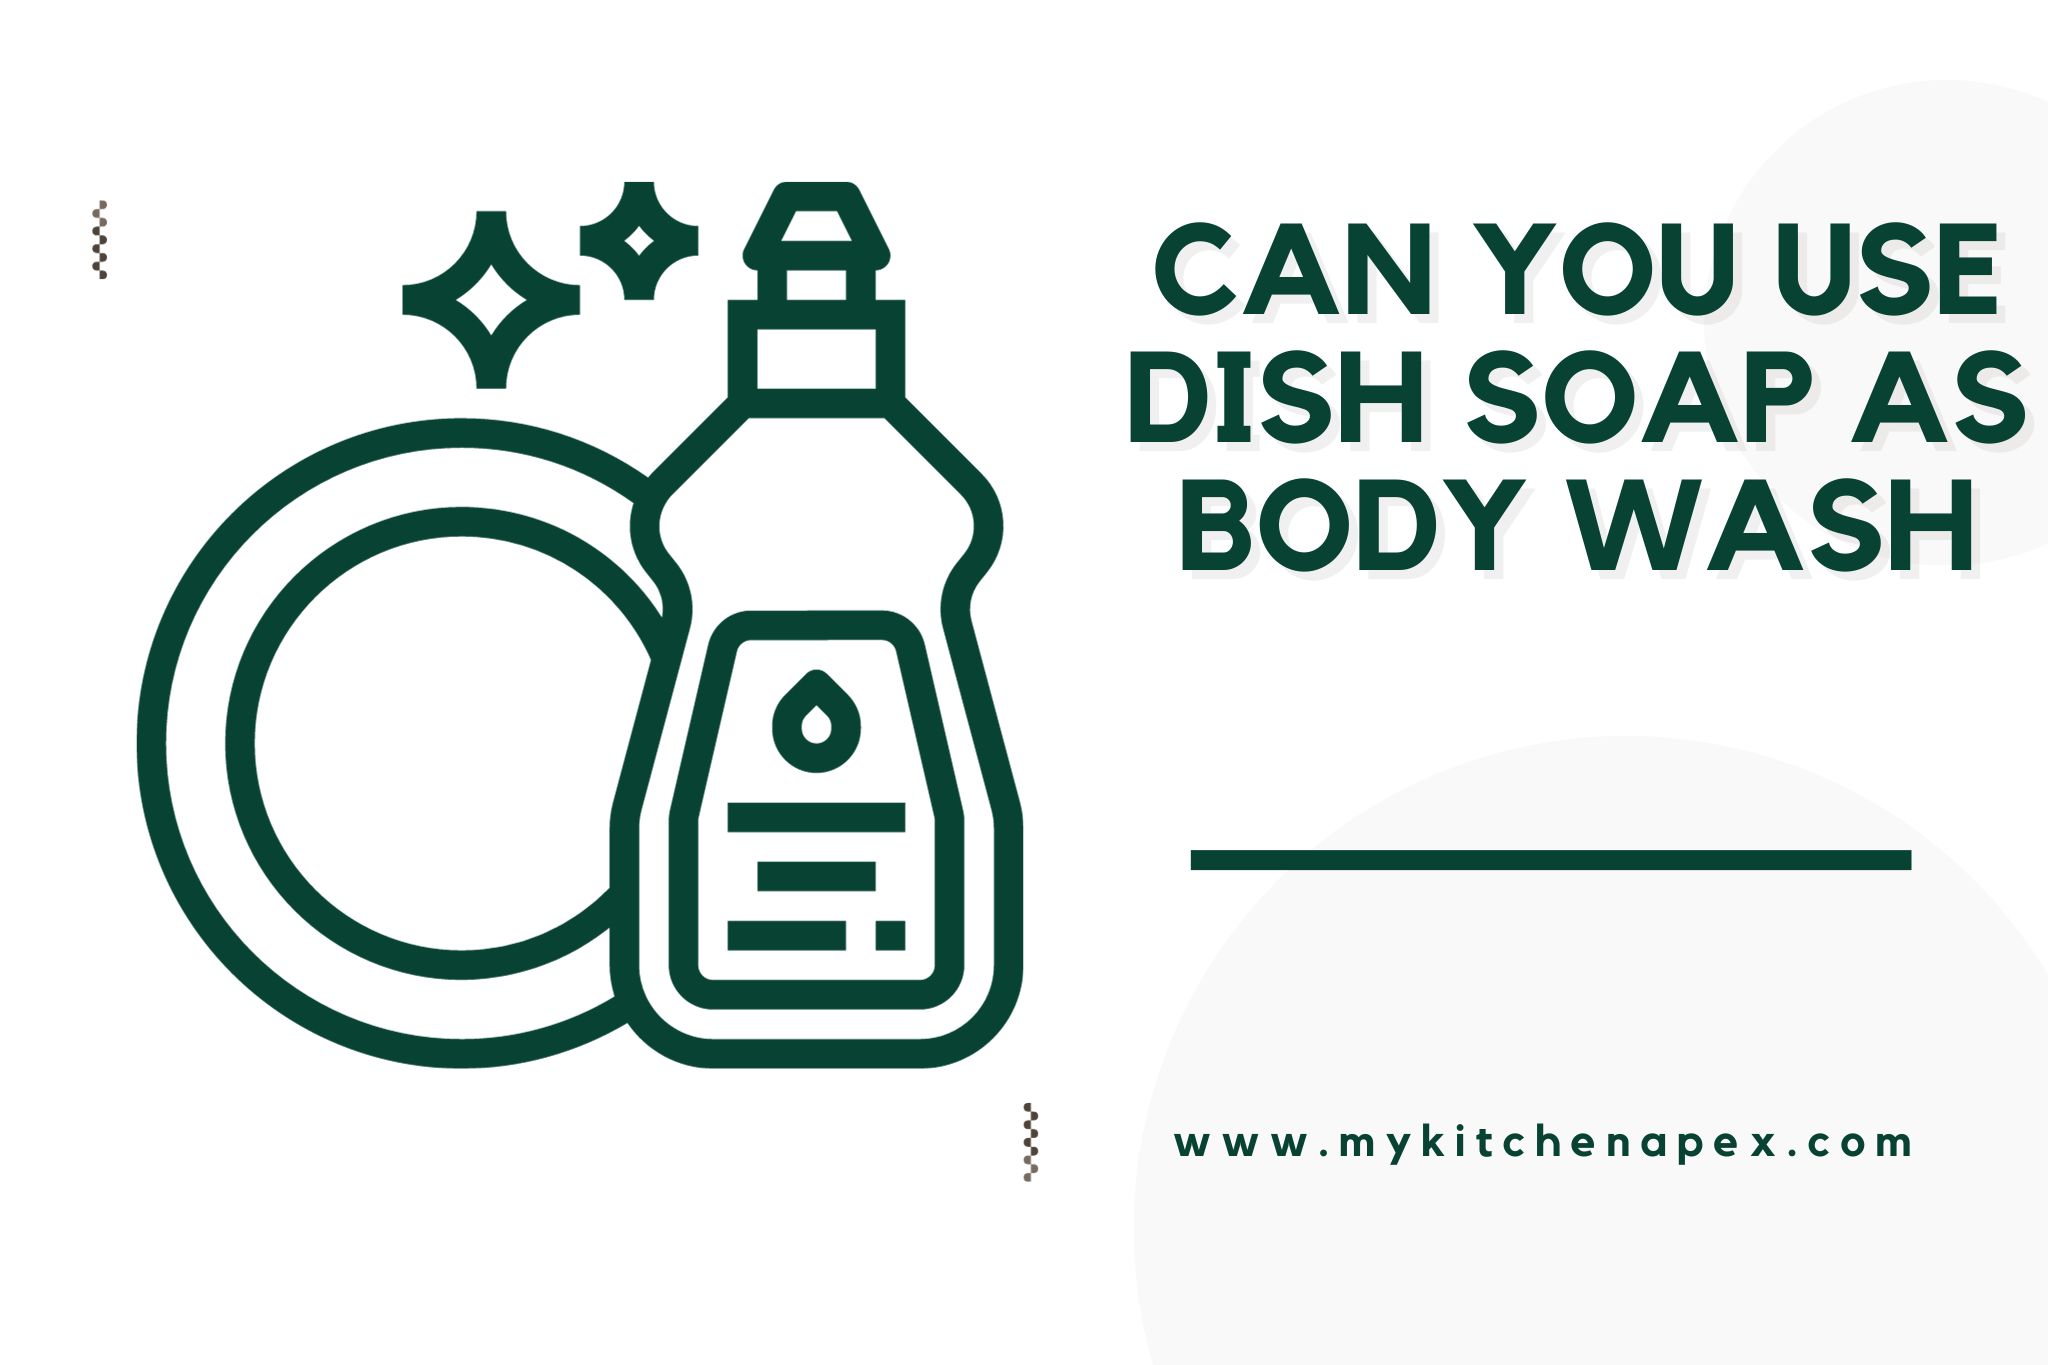 can you use dish soap as body wash